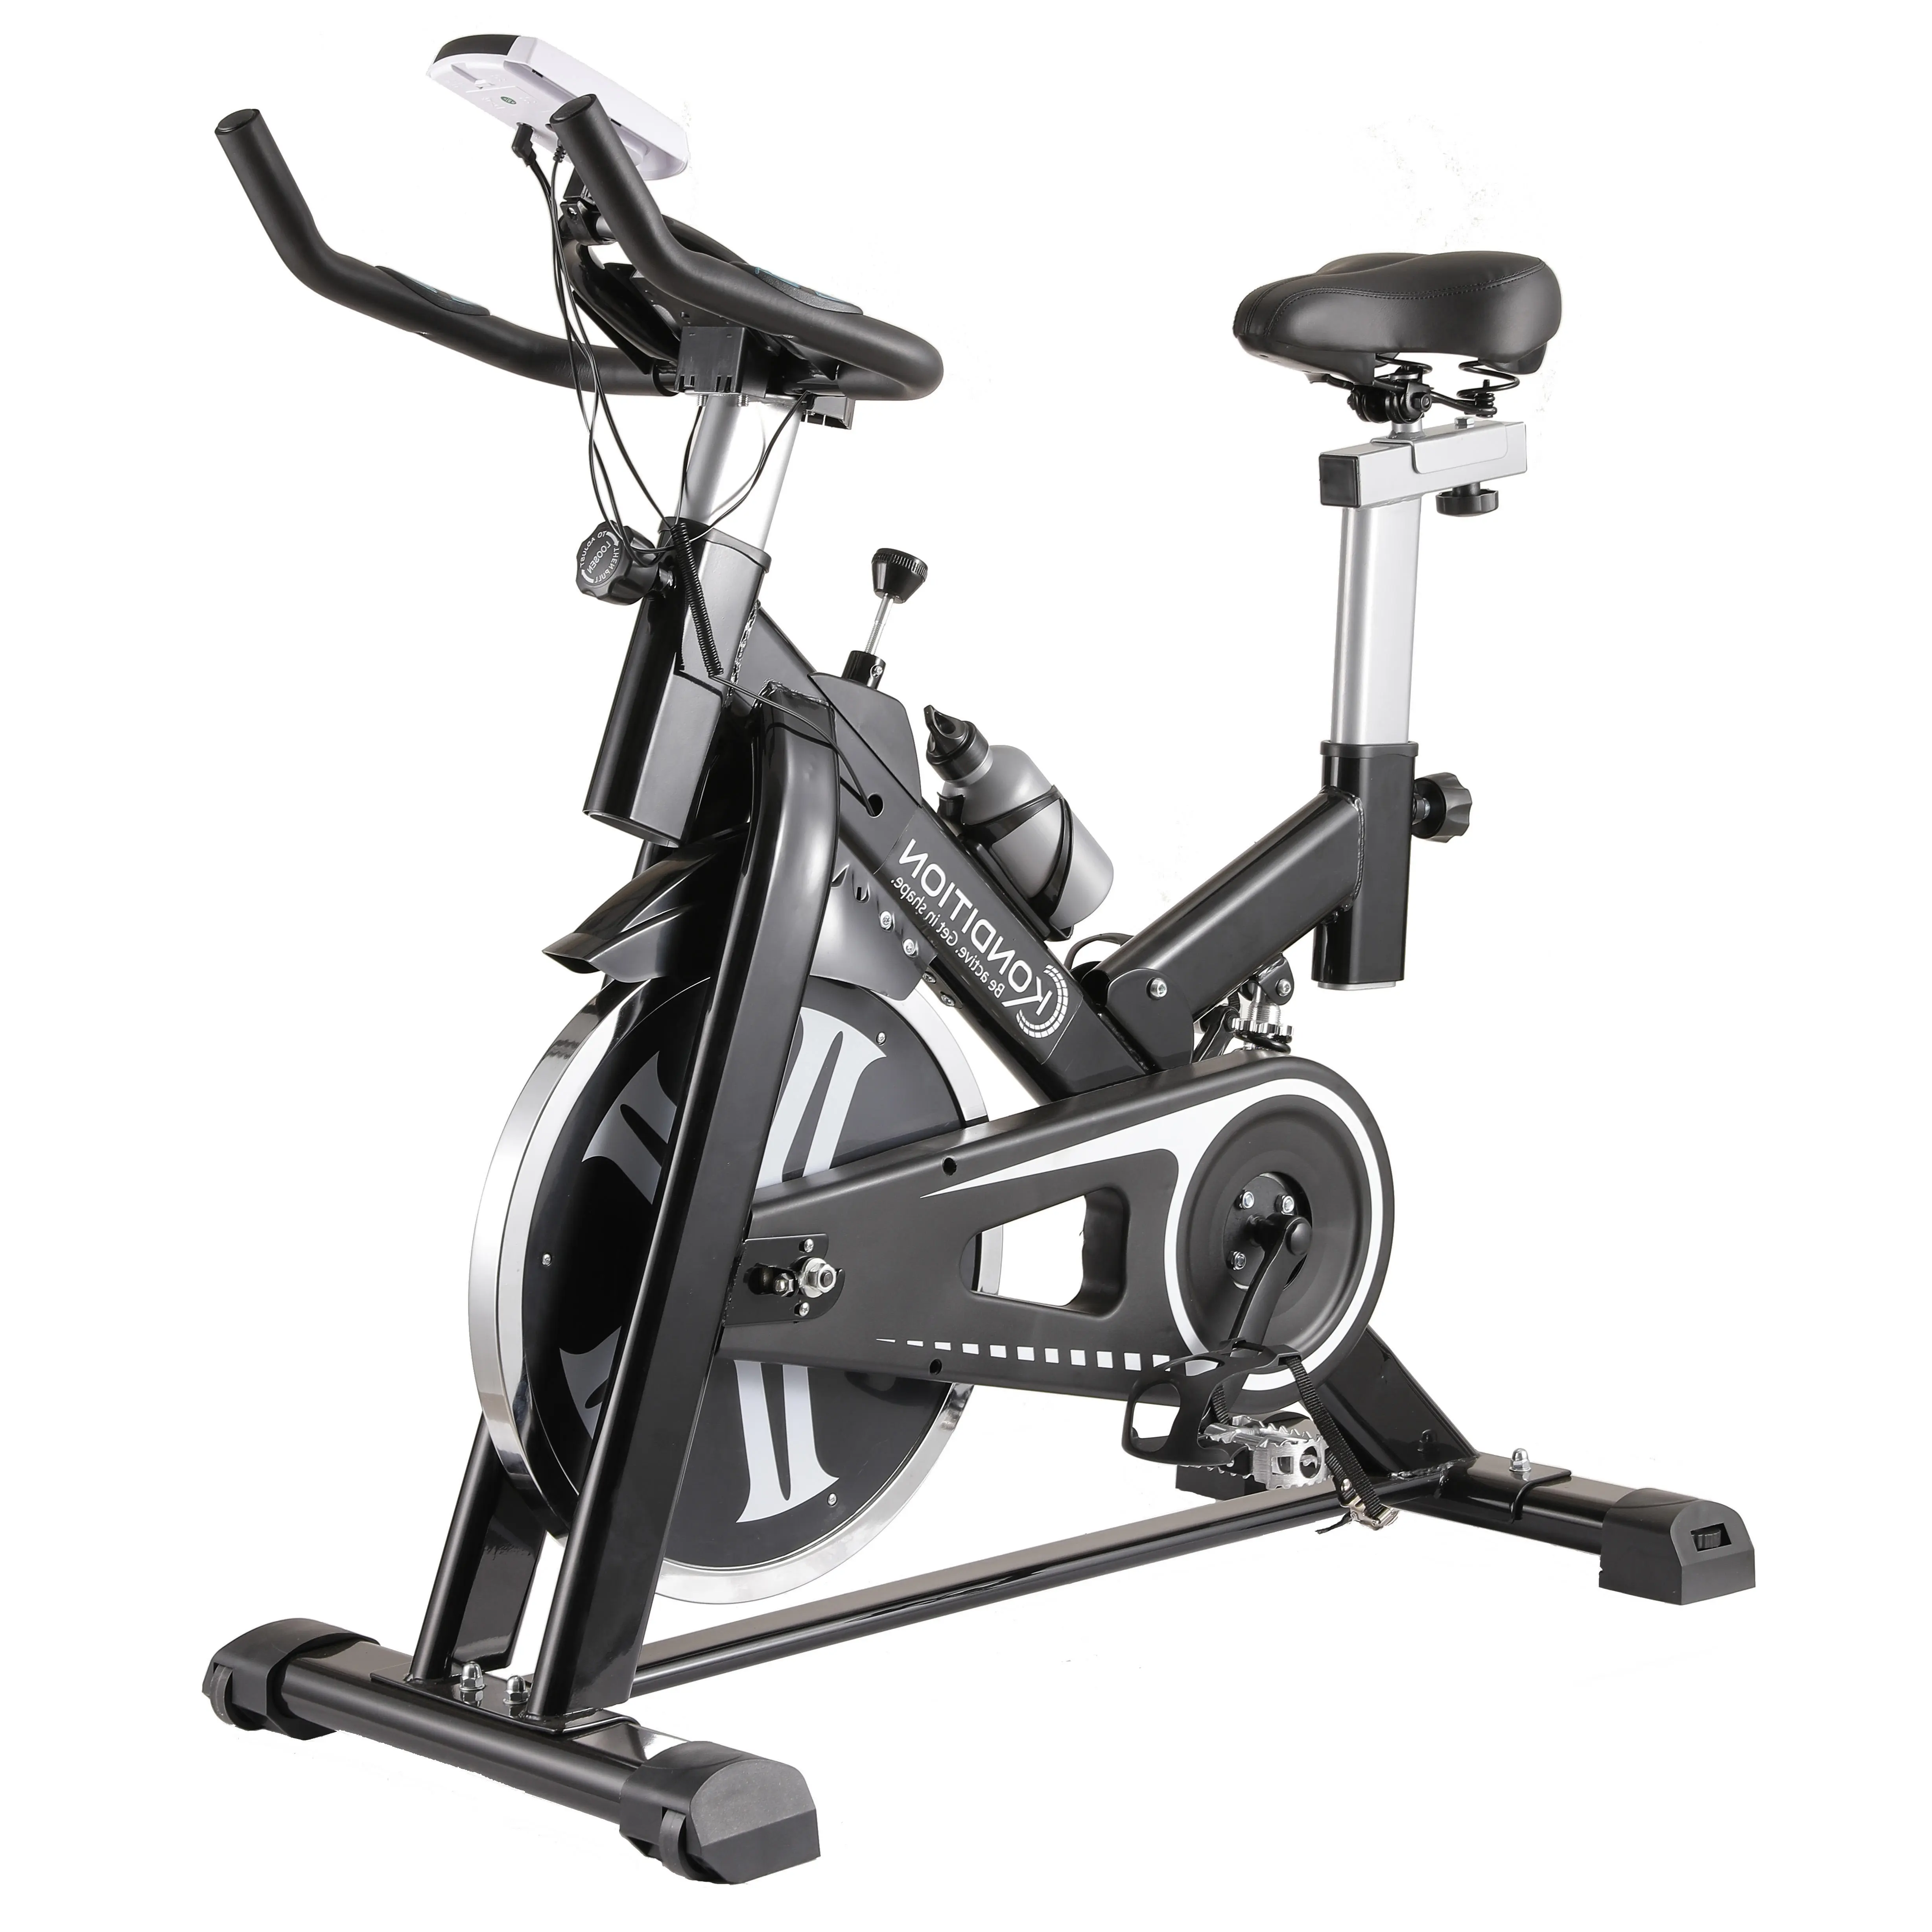 Indoor Cardio Training Exercise Spin Bike Magnetic Spinning Bike Prices For Lose Weight Body Strong